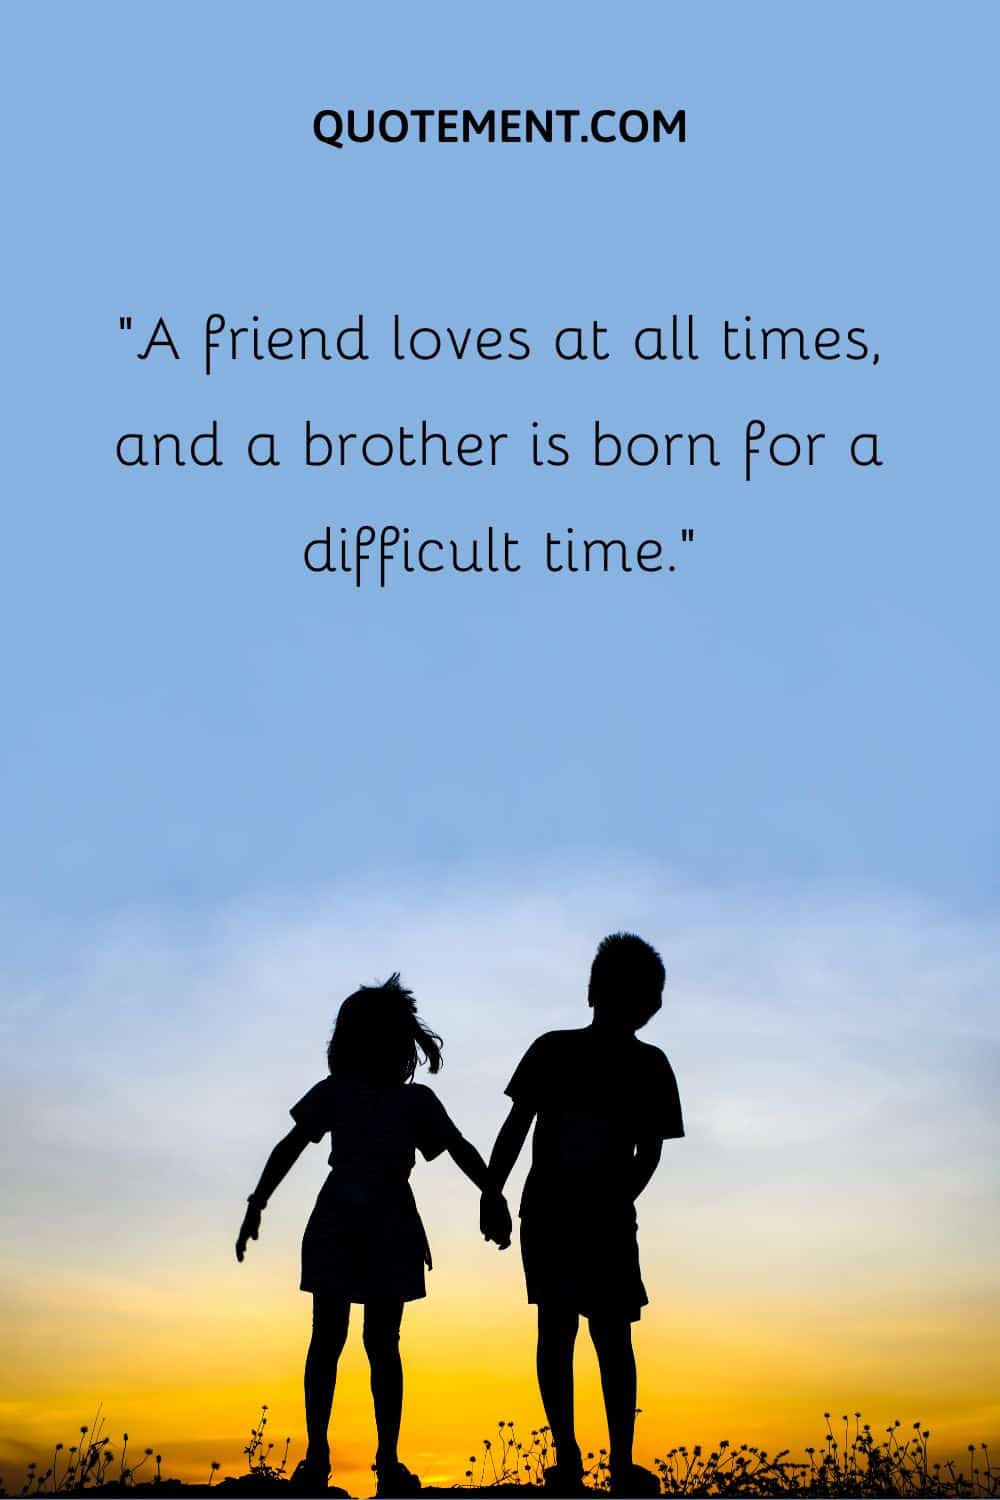 A friend loves at all times, and a brother is born for a difficult time.